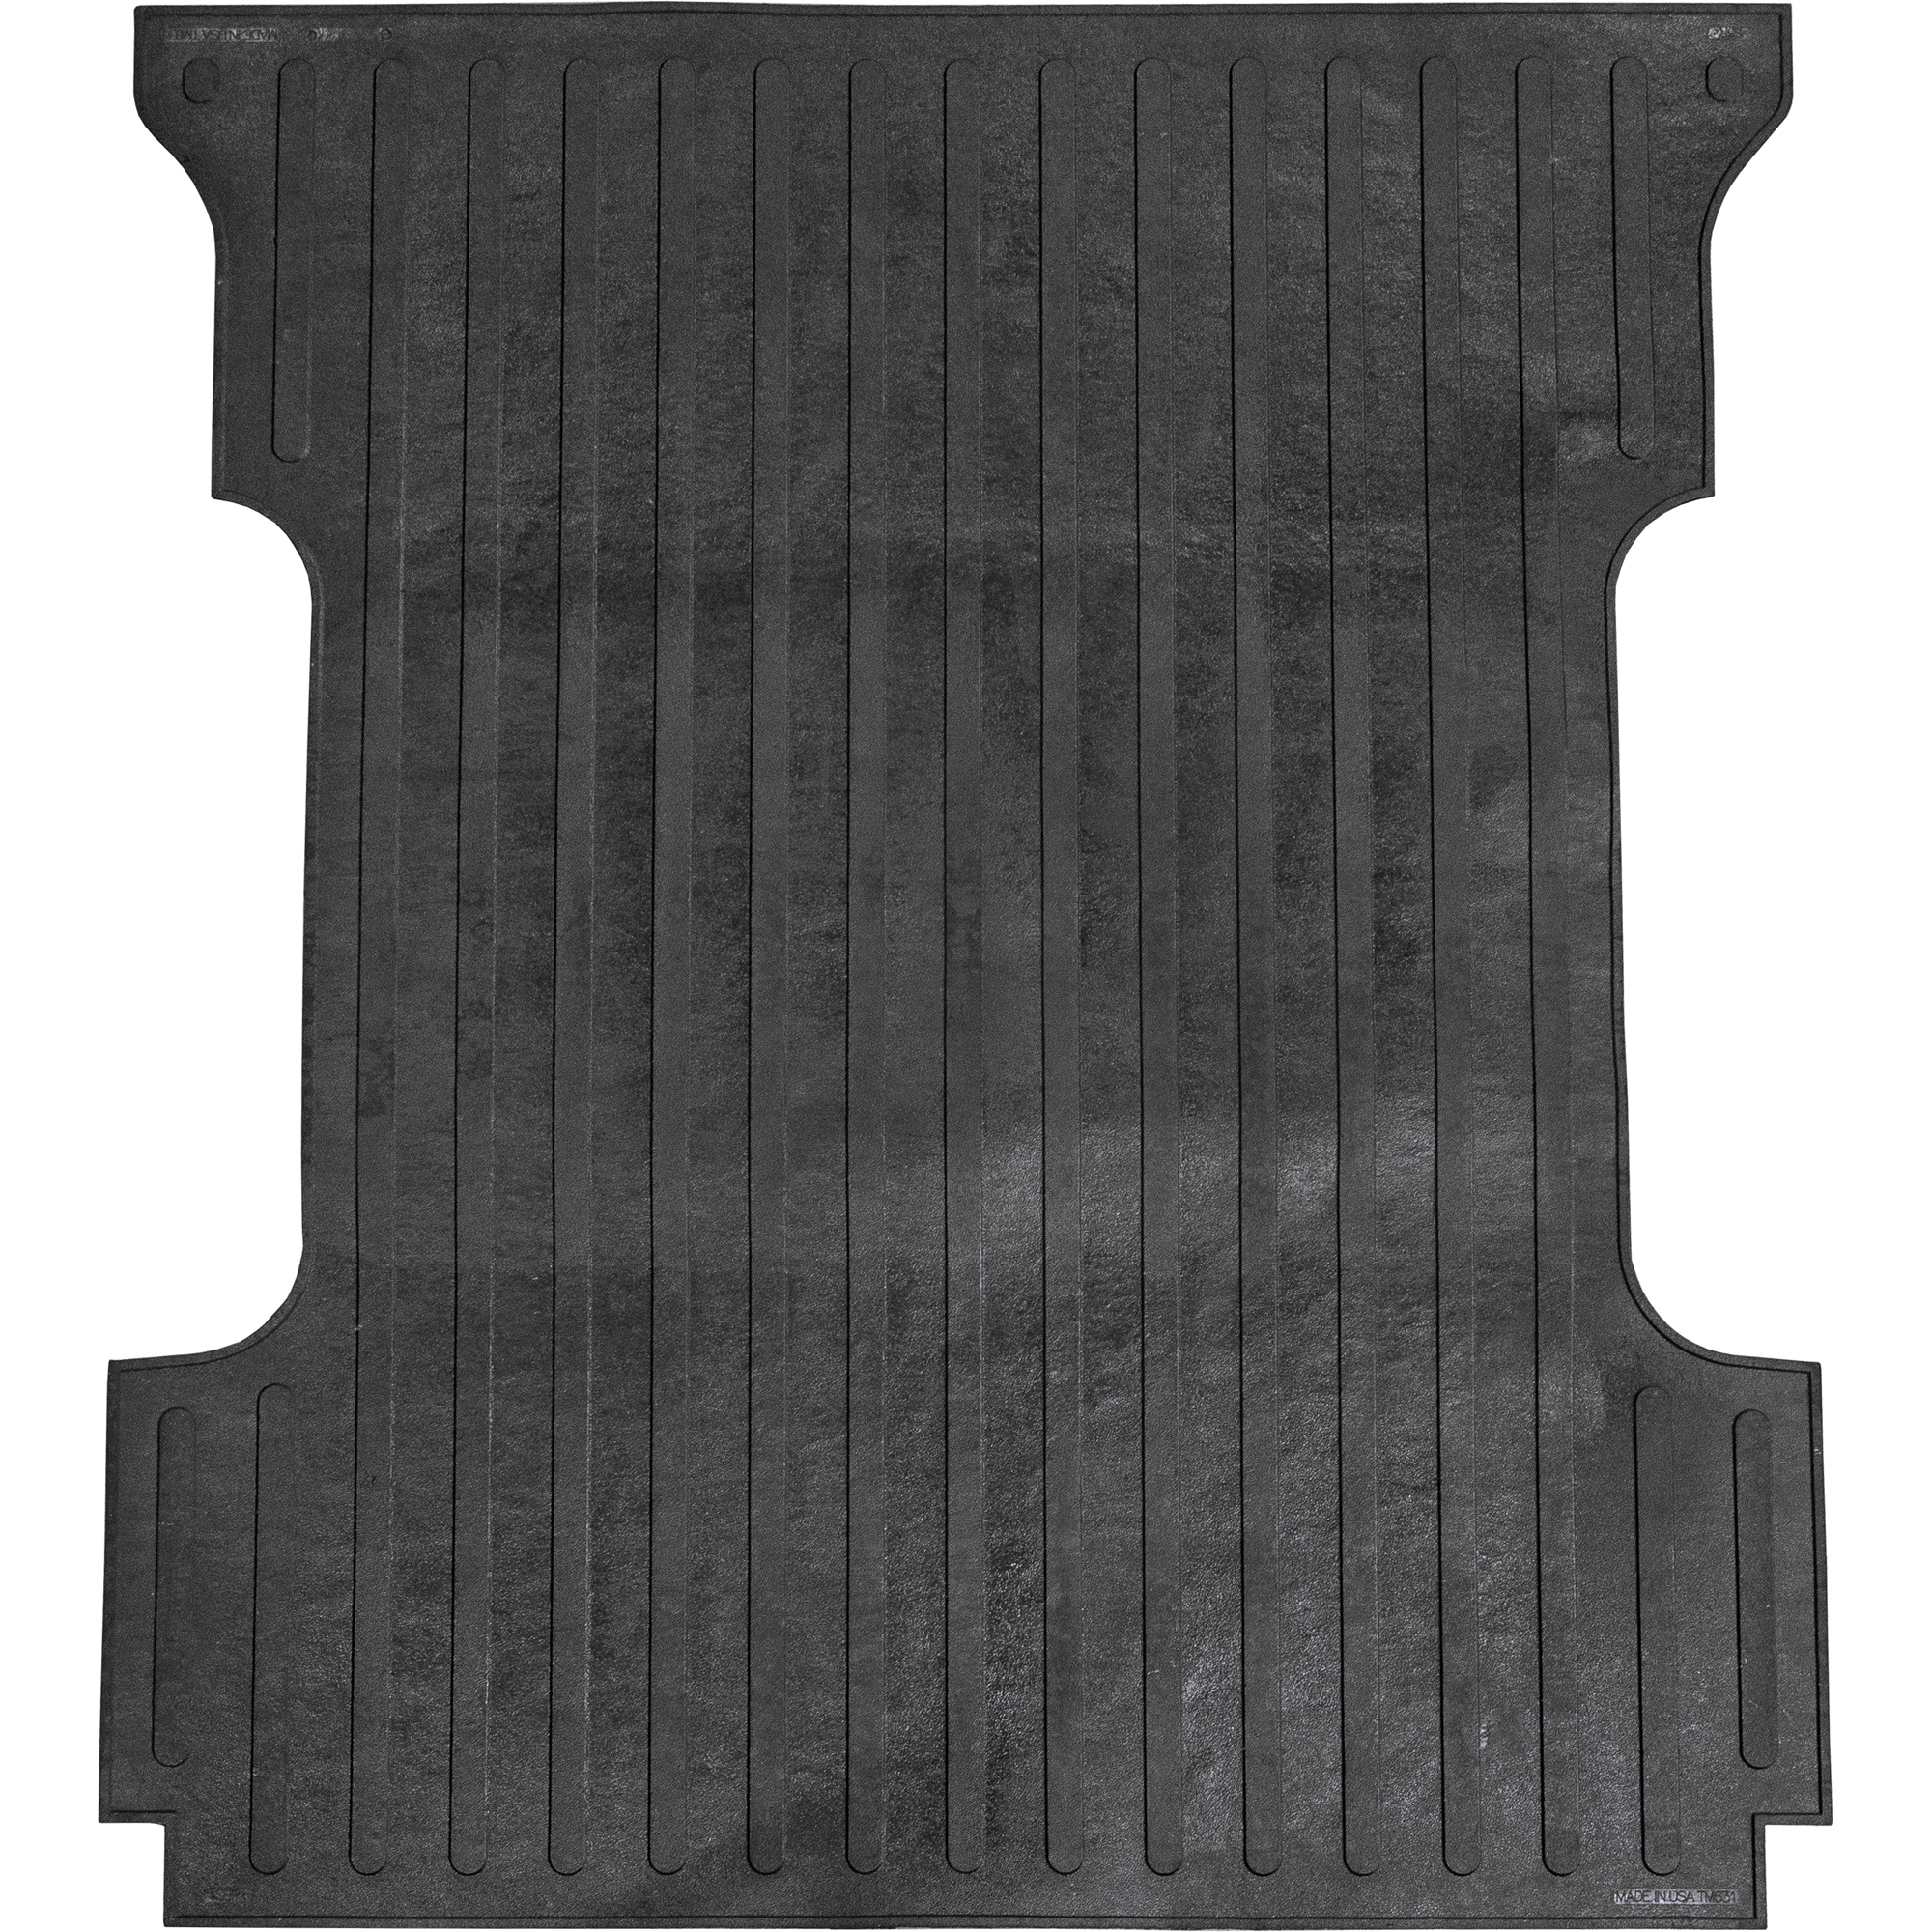 Boomerang Rubber, Ford F150 Super Crew, Year 2004-2014 Bed Mat, 5.5ft. Long, Primary Color Black, Model TM522BAGGED